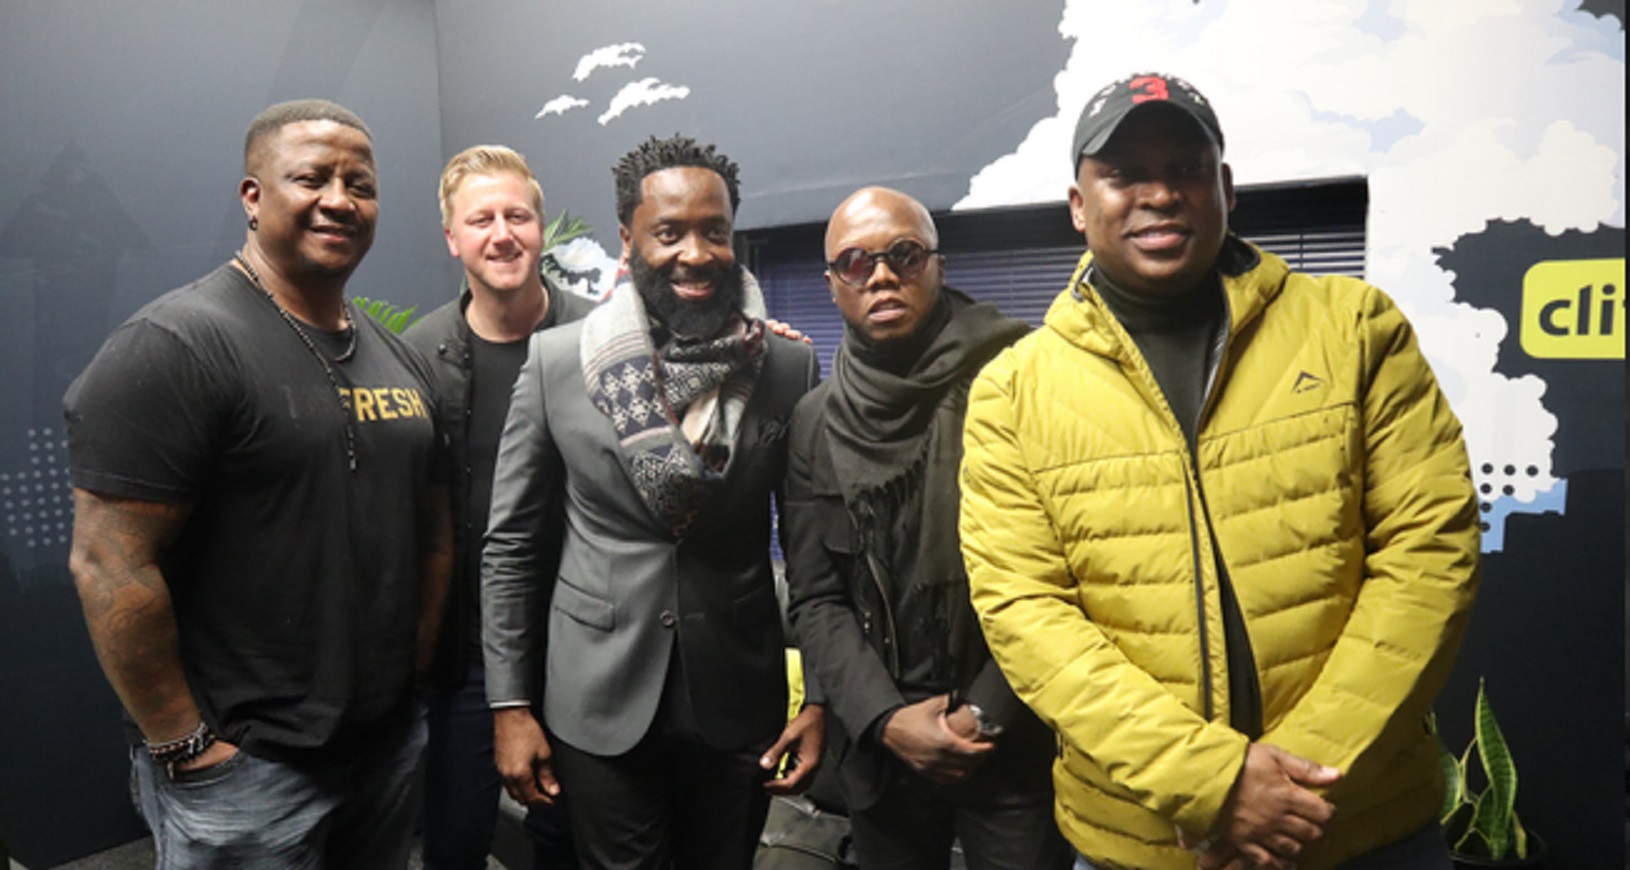 Fired FM cast - Source: Instagram@tbotouch